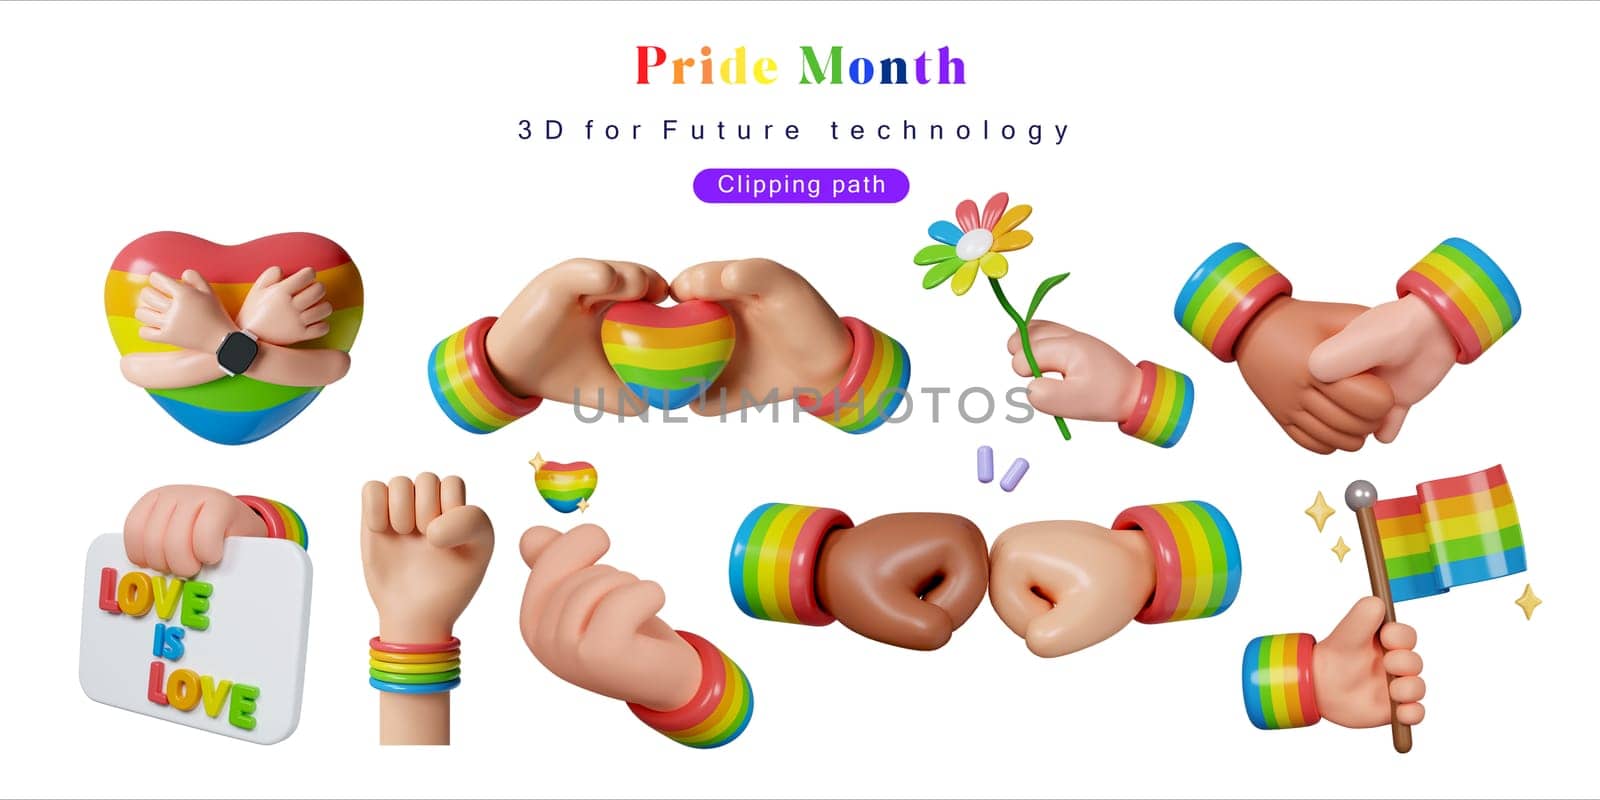 Pride day 3D icon set. Hand shows different gestures signs, 3d rendering illustration by meepiangraphic